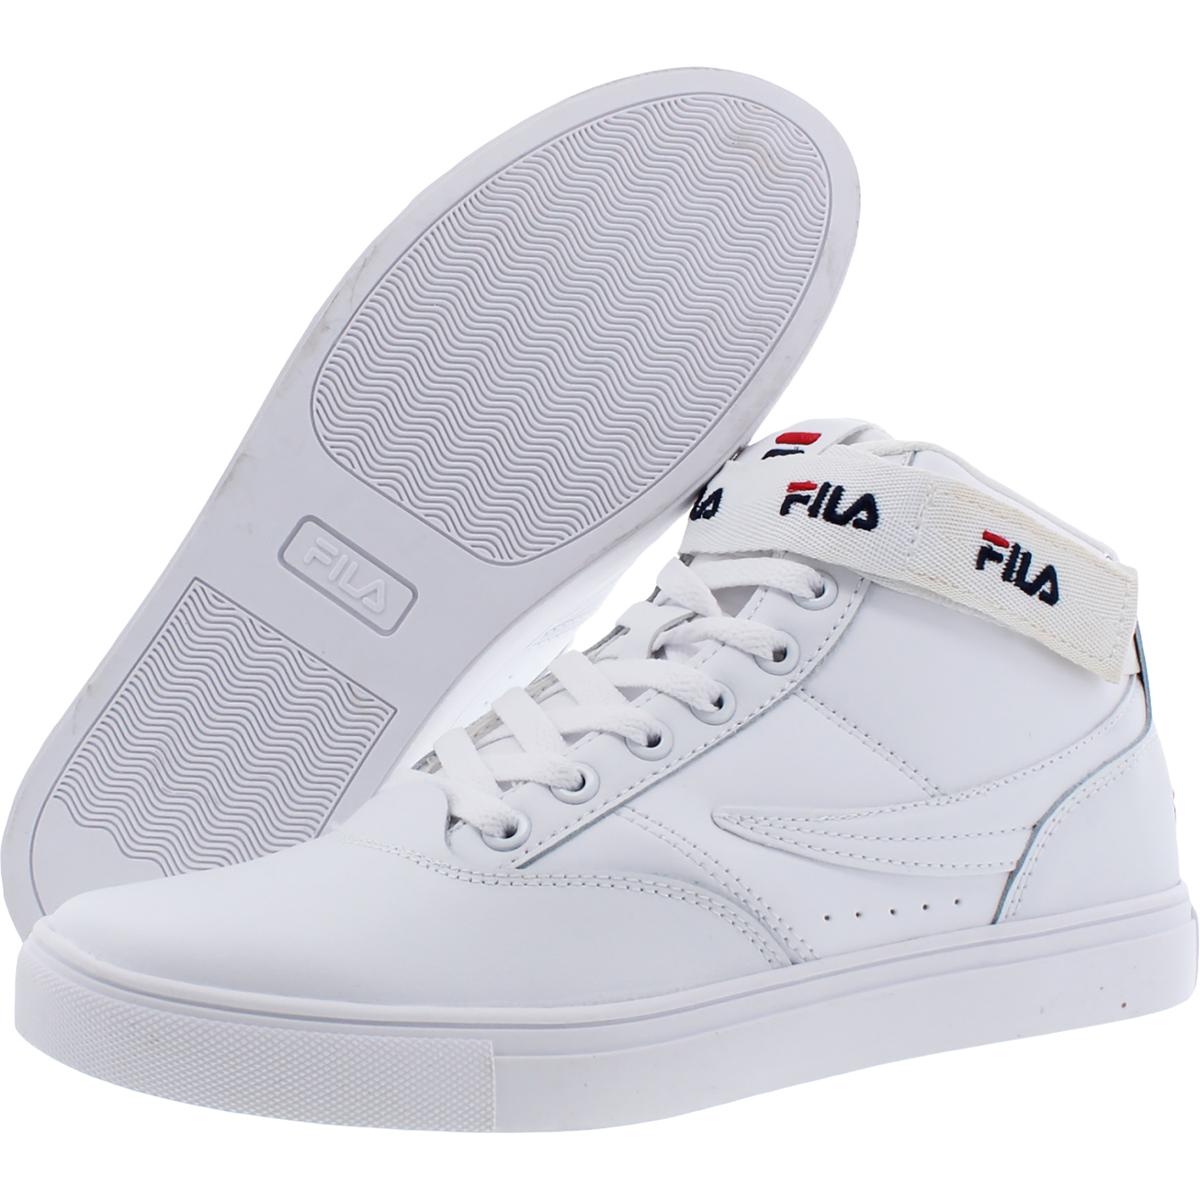 Fila Womens Filario Synthetic Mid Top Trainers Sneakers Shoes BHFO 7324 ...